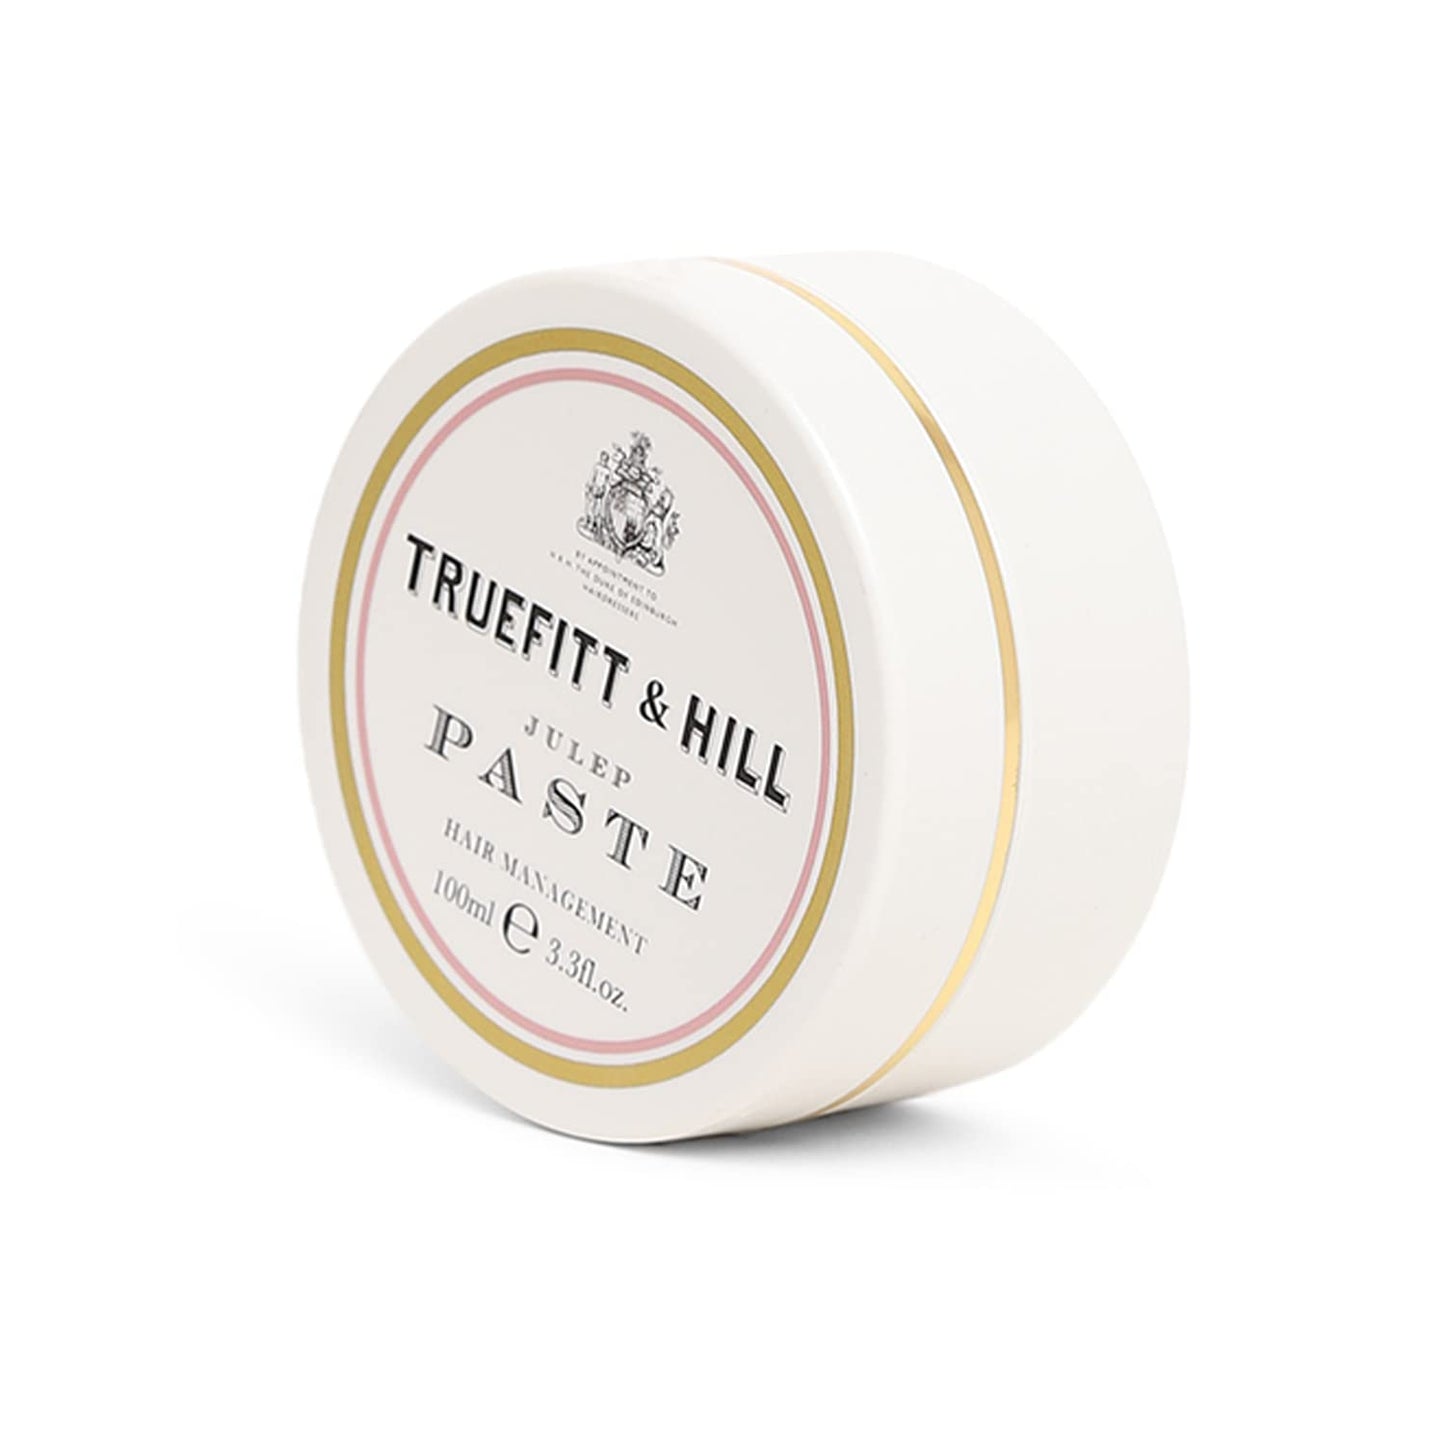 Truefitt & Hill Hair Management Julep Paste 100GM | Signature Product of Truefitt and Hill | Essential Grooming Collection For Men | Suitable For All Hair Types